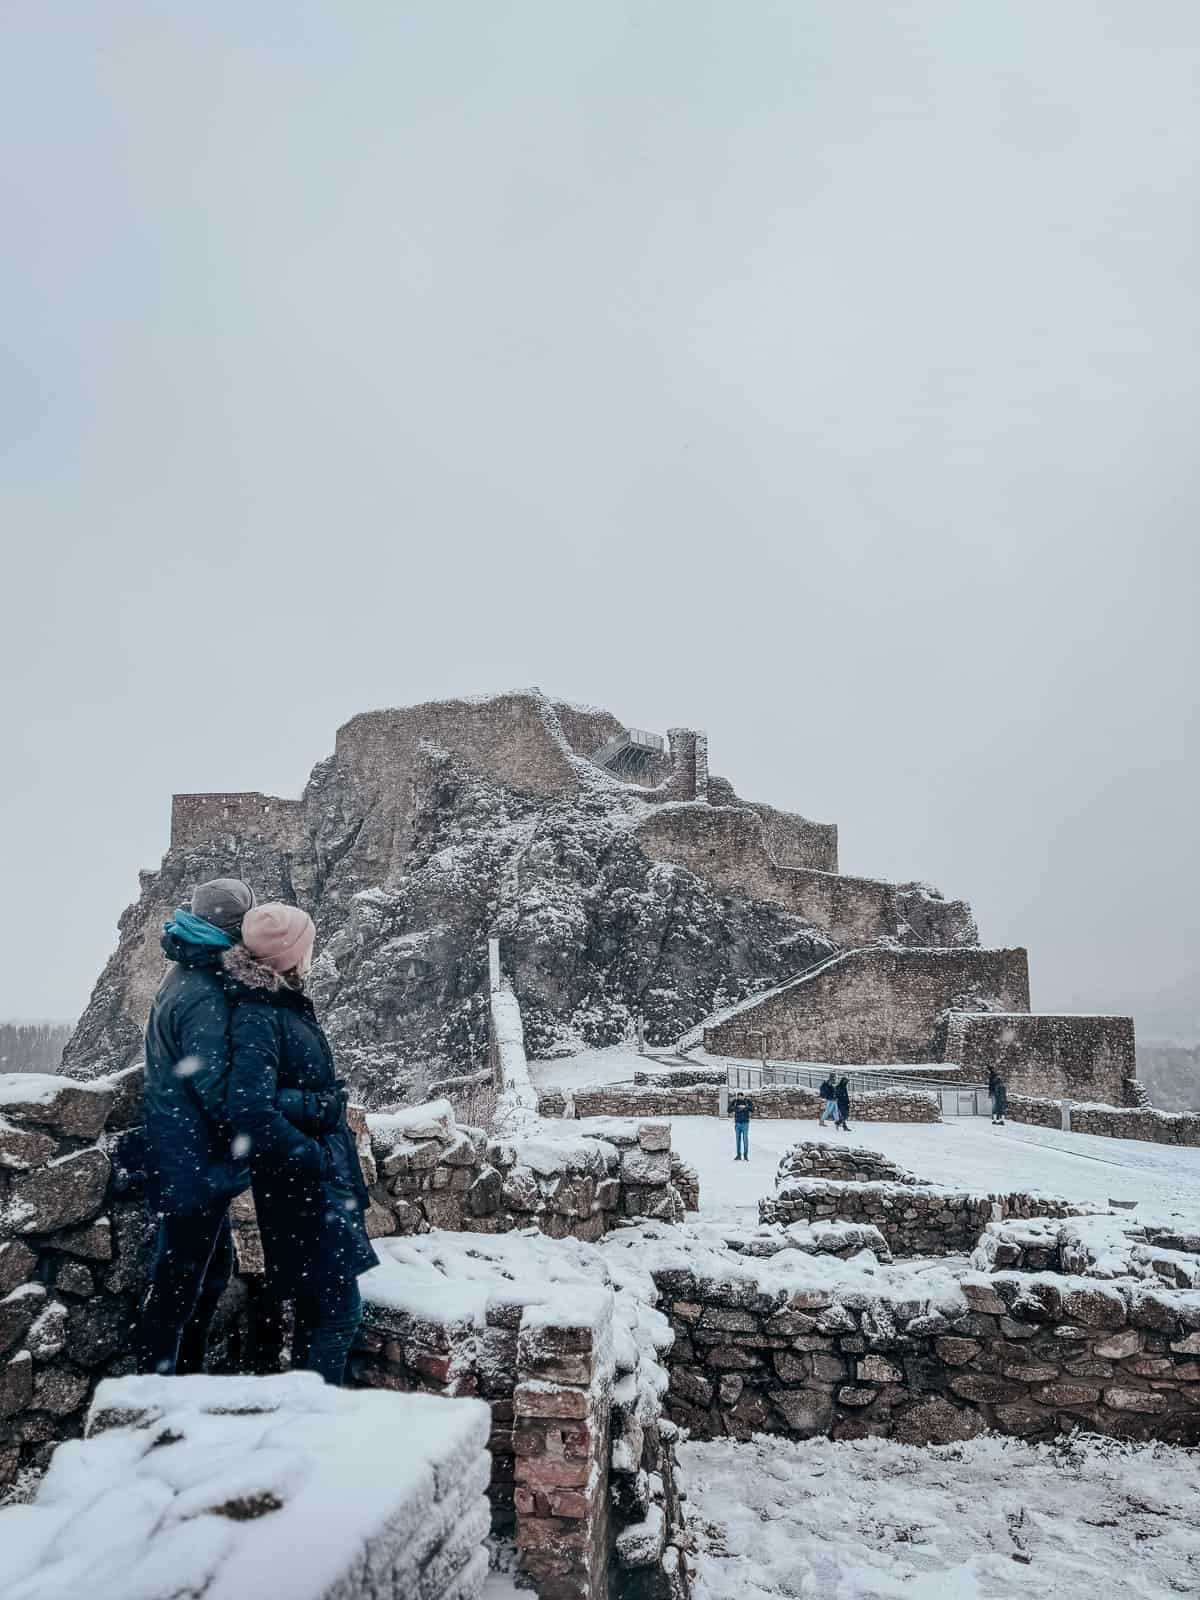 Two people in winter attire gaze at a snowy hilltop castle ruins, with snowflakes falling around them and other visitors in the distance.